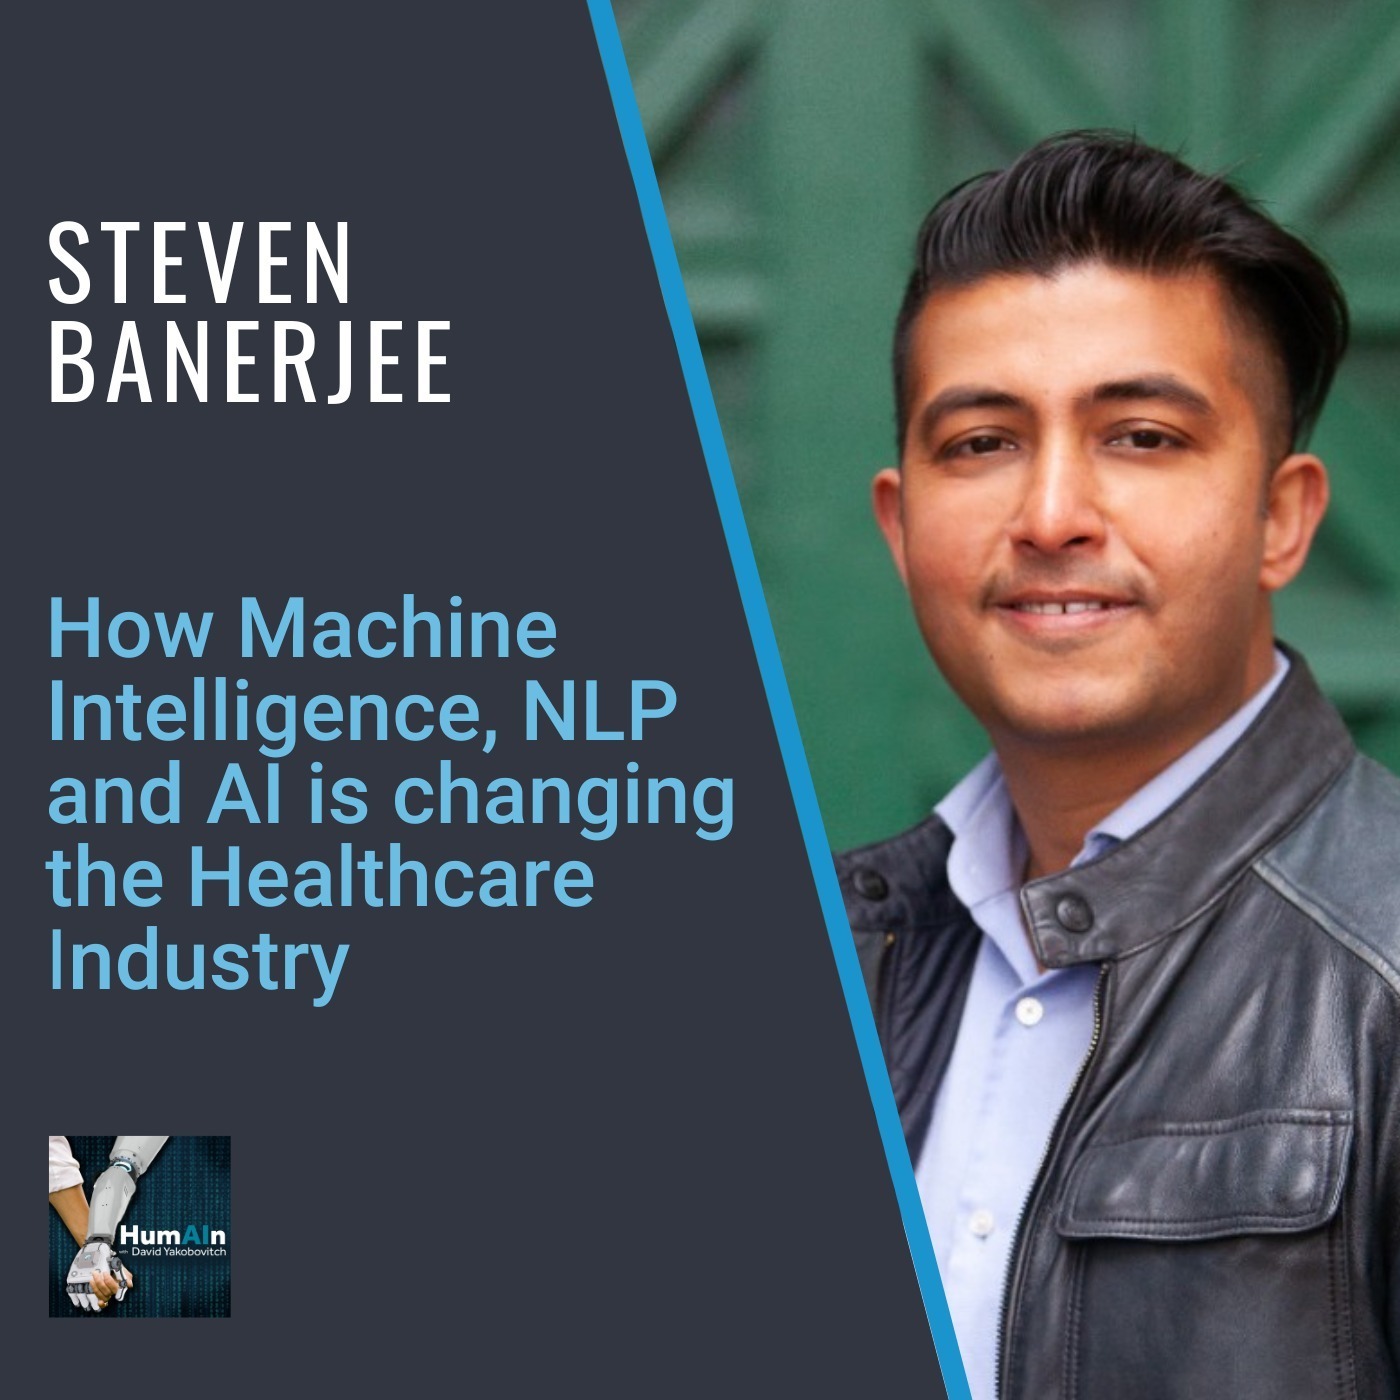 Steven Banerjee: How Machine Intelligence, NLP and AI is changing Health Care